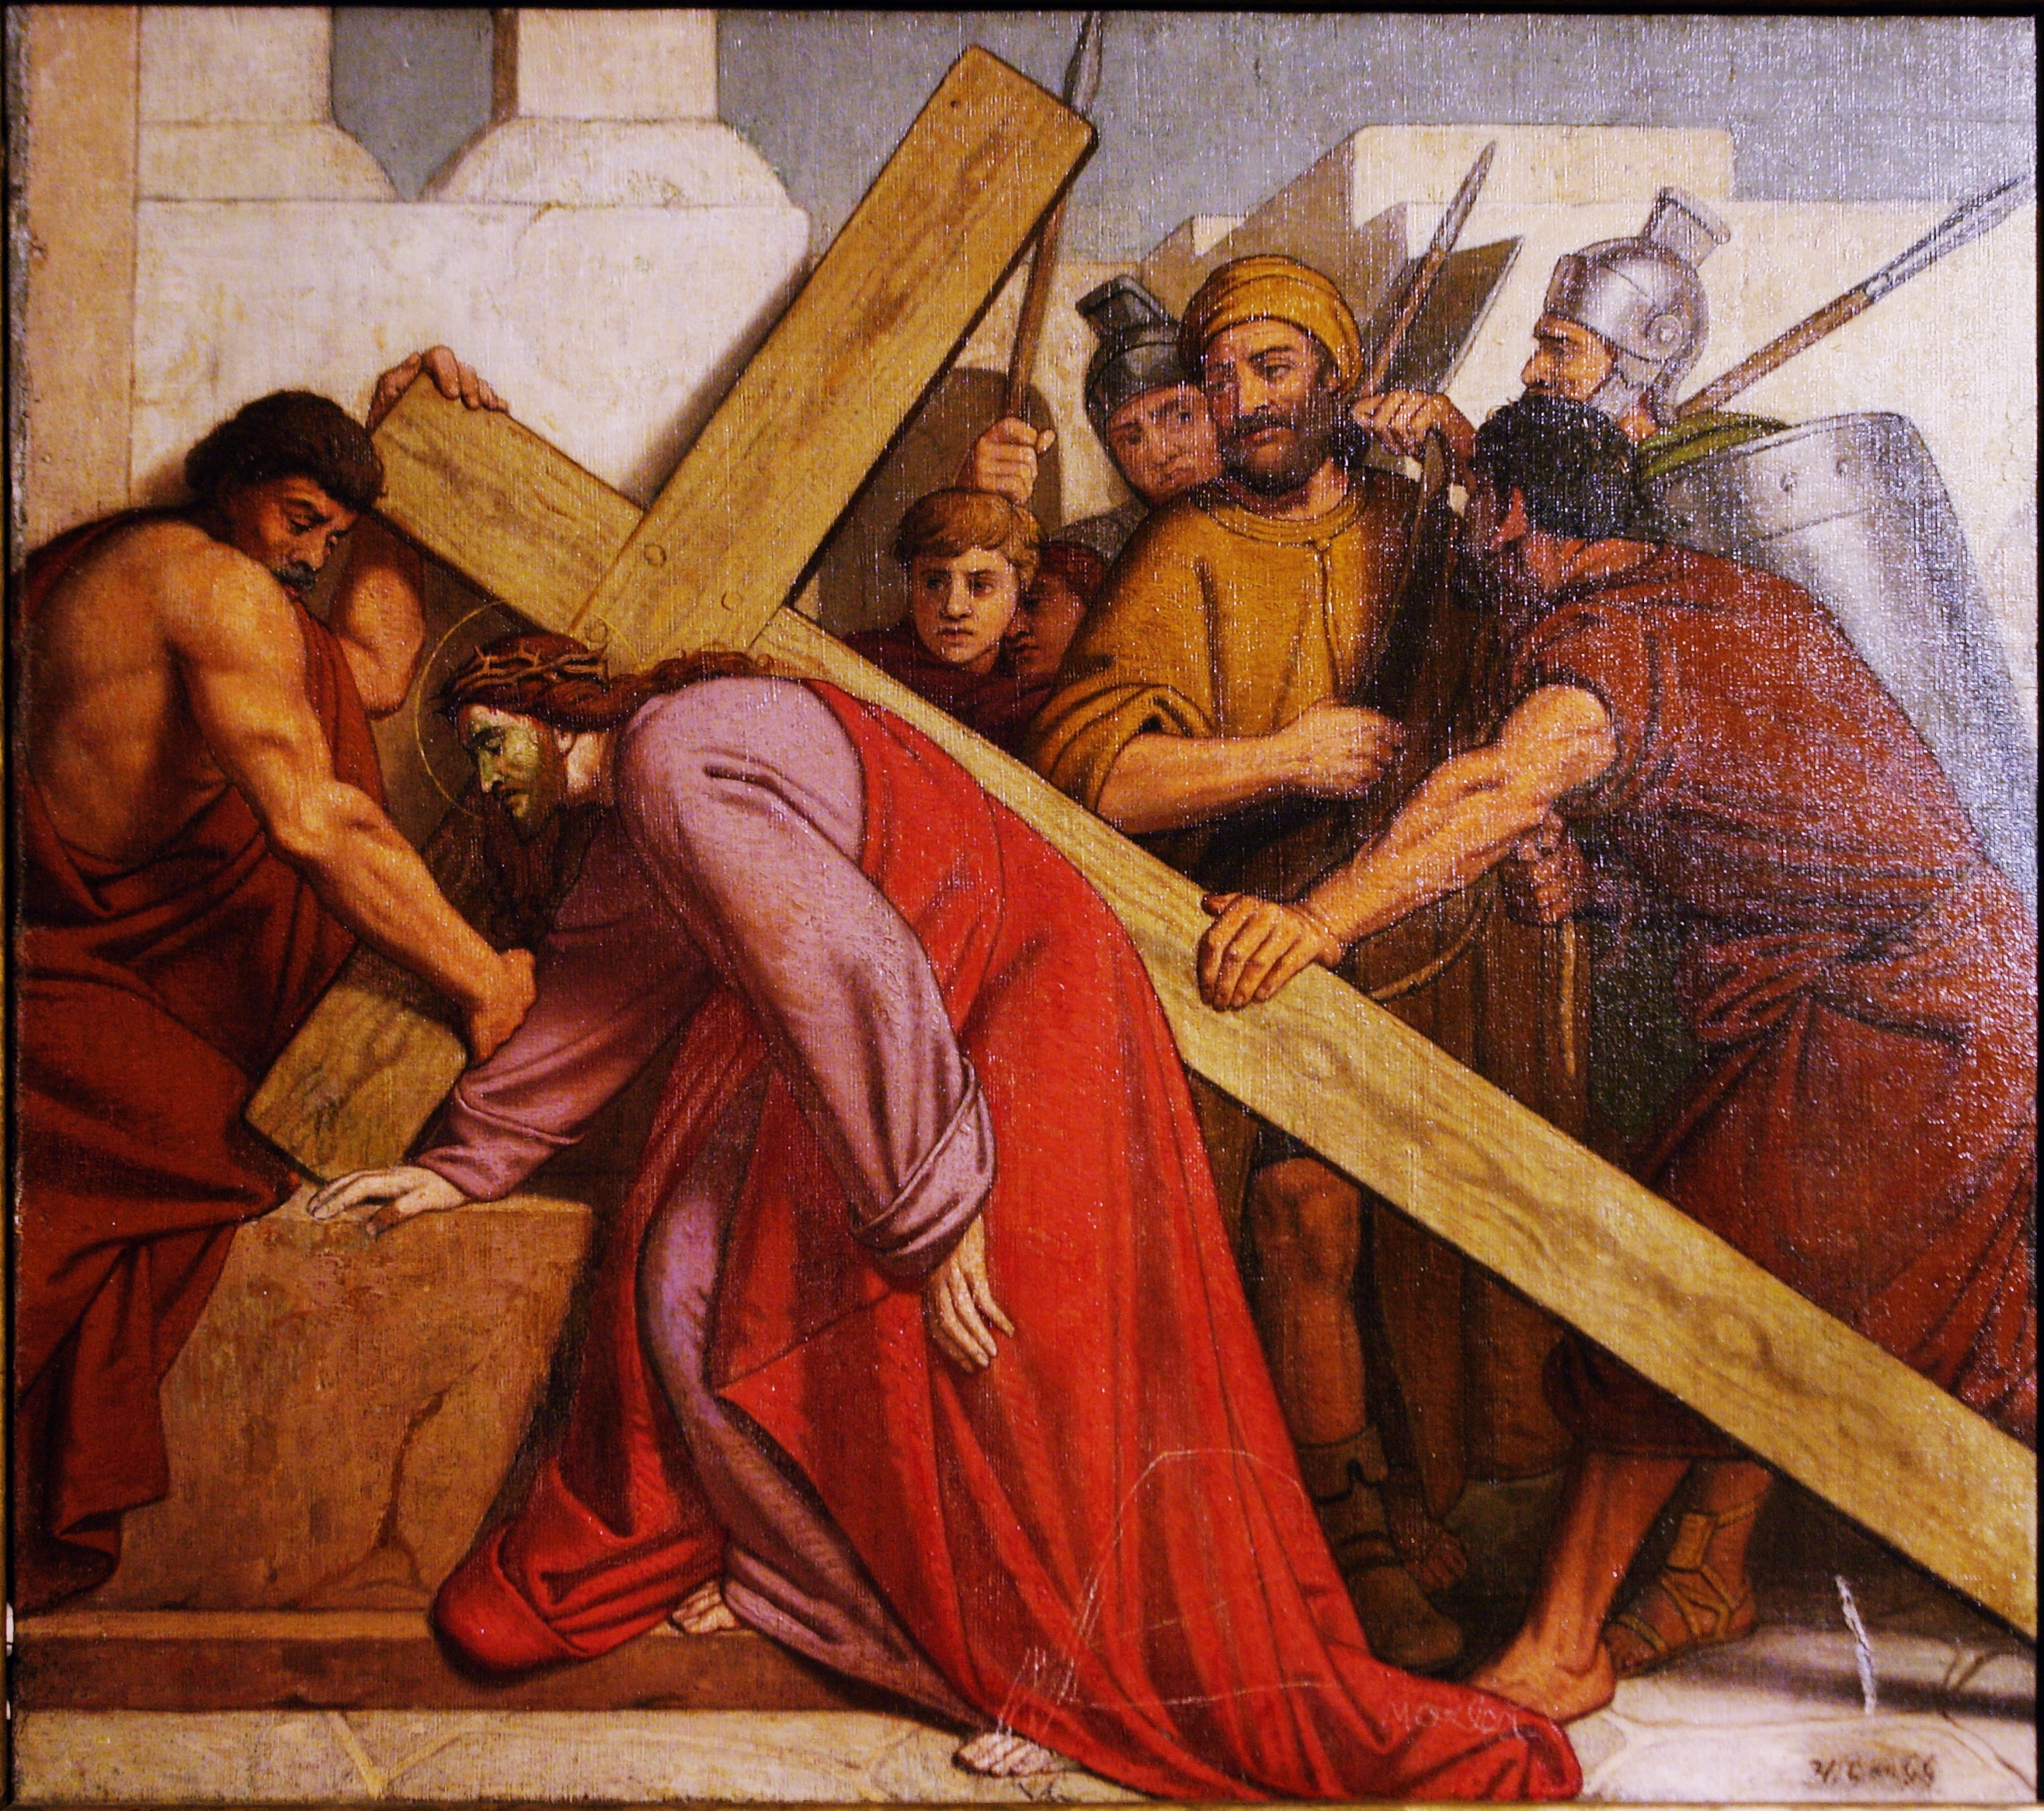 The most common Lent Tradition, The Stations of the Cross.